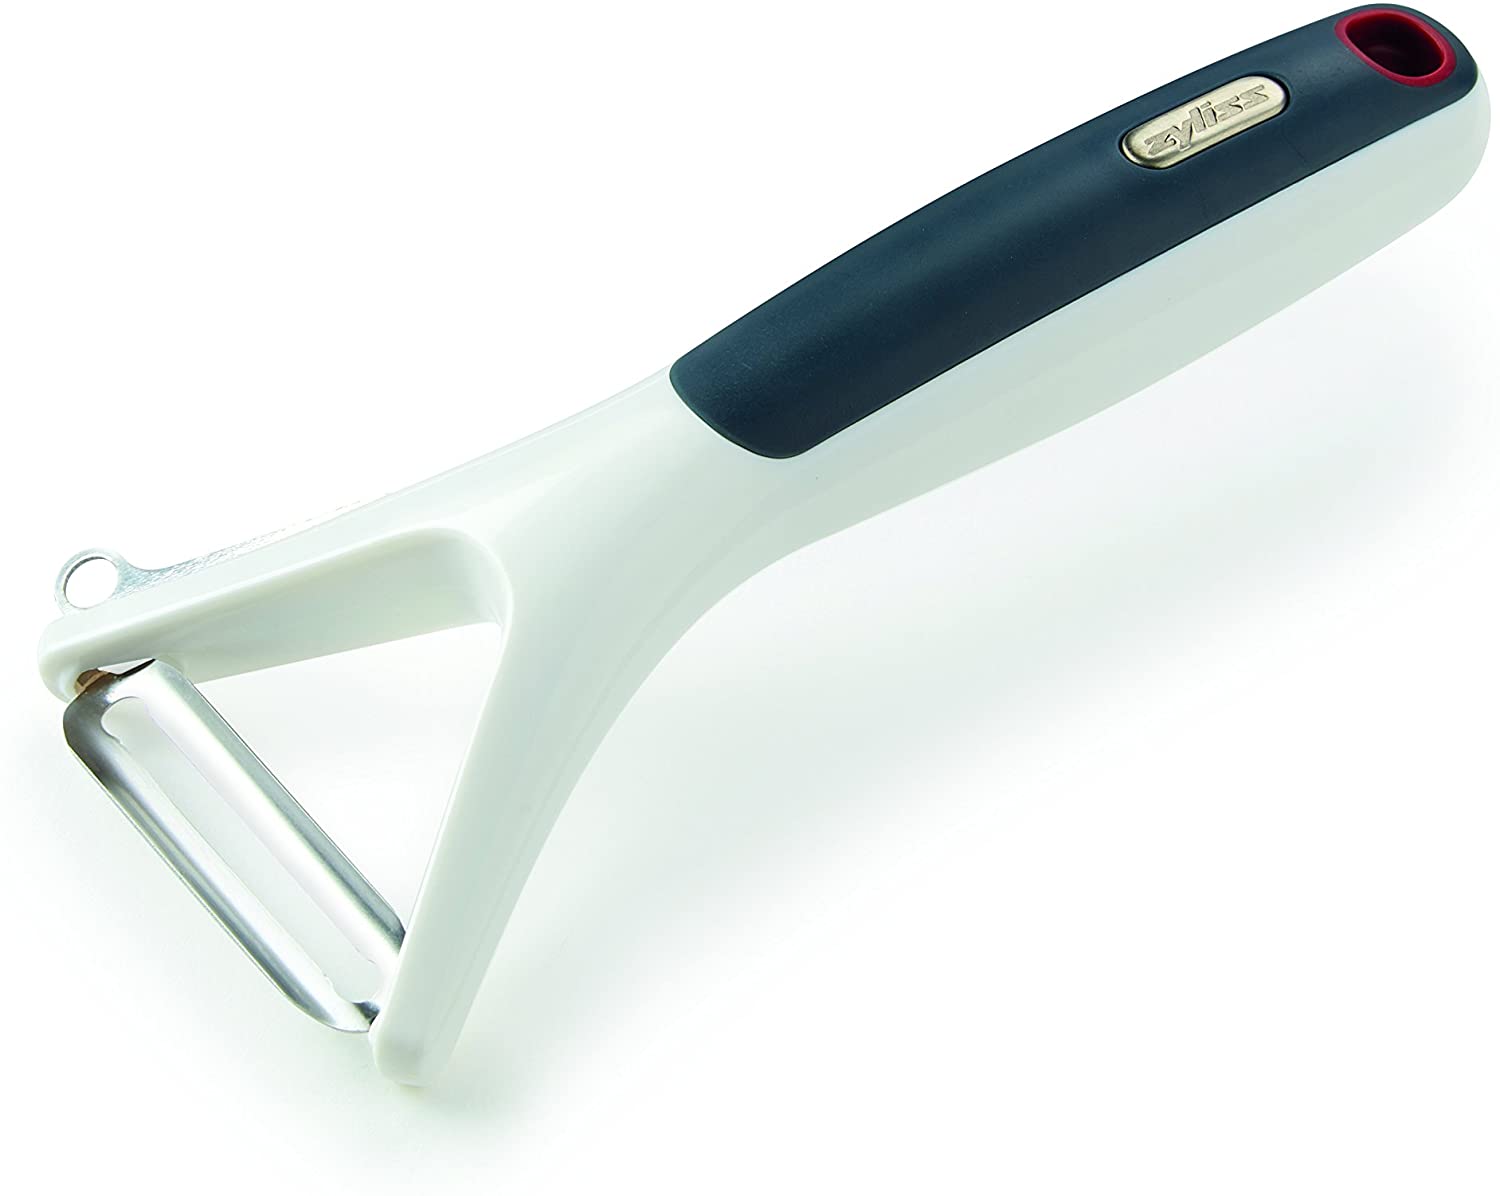 Zyliss Y Peeler - Ergonomically designed peeler for effortless and easy peeling, peeler with extra sharp stainless steel blade and comfortable grip.